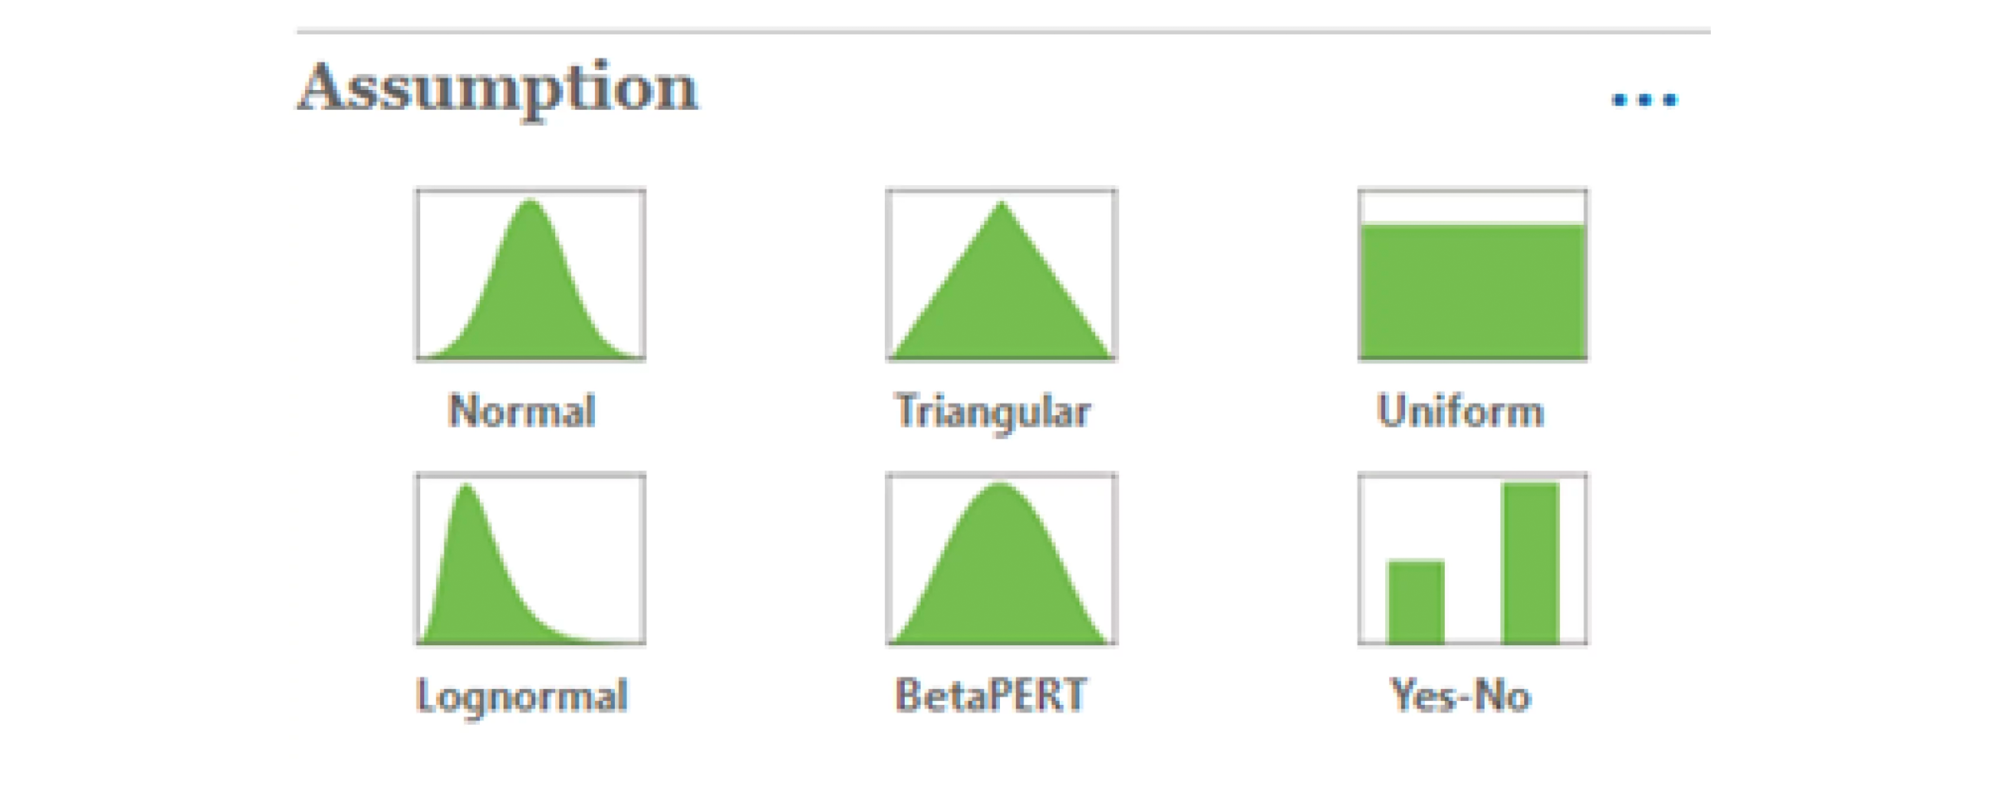 Oracle EPM Strategic Modeling distribution curves library includes normal, triangular, uniform, logonormal, betaPERT, and yes-no